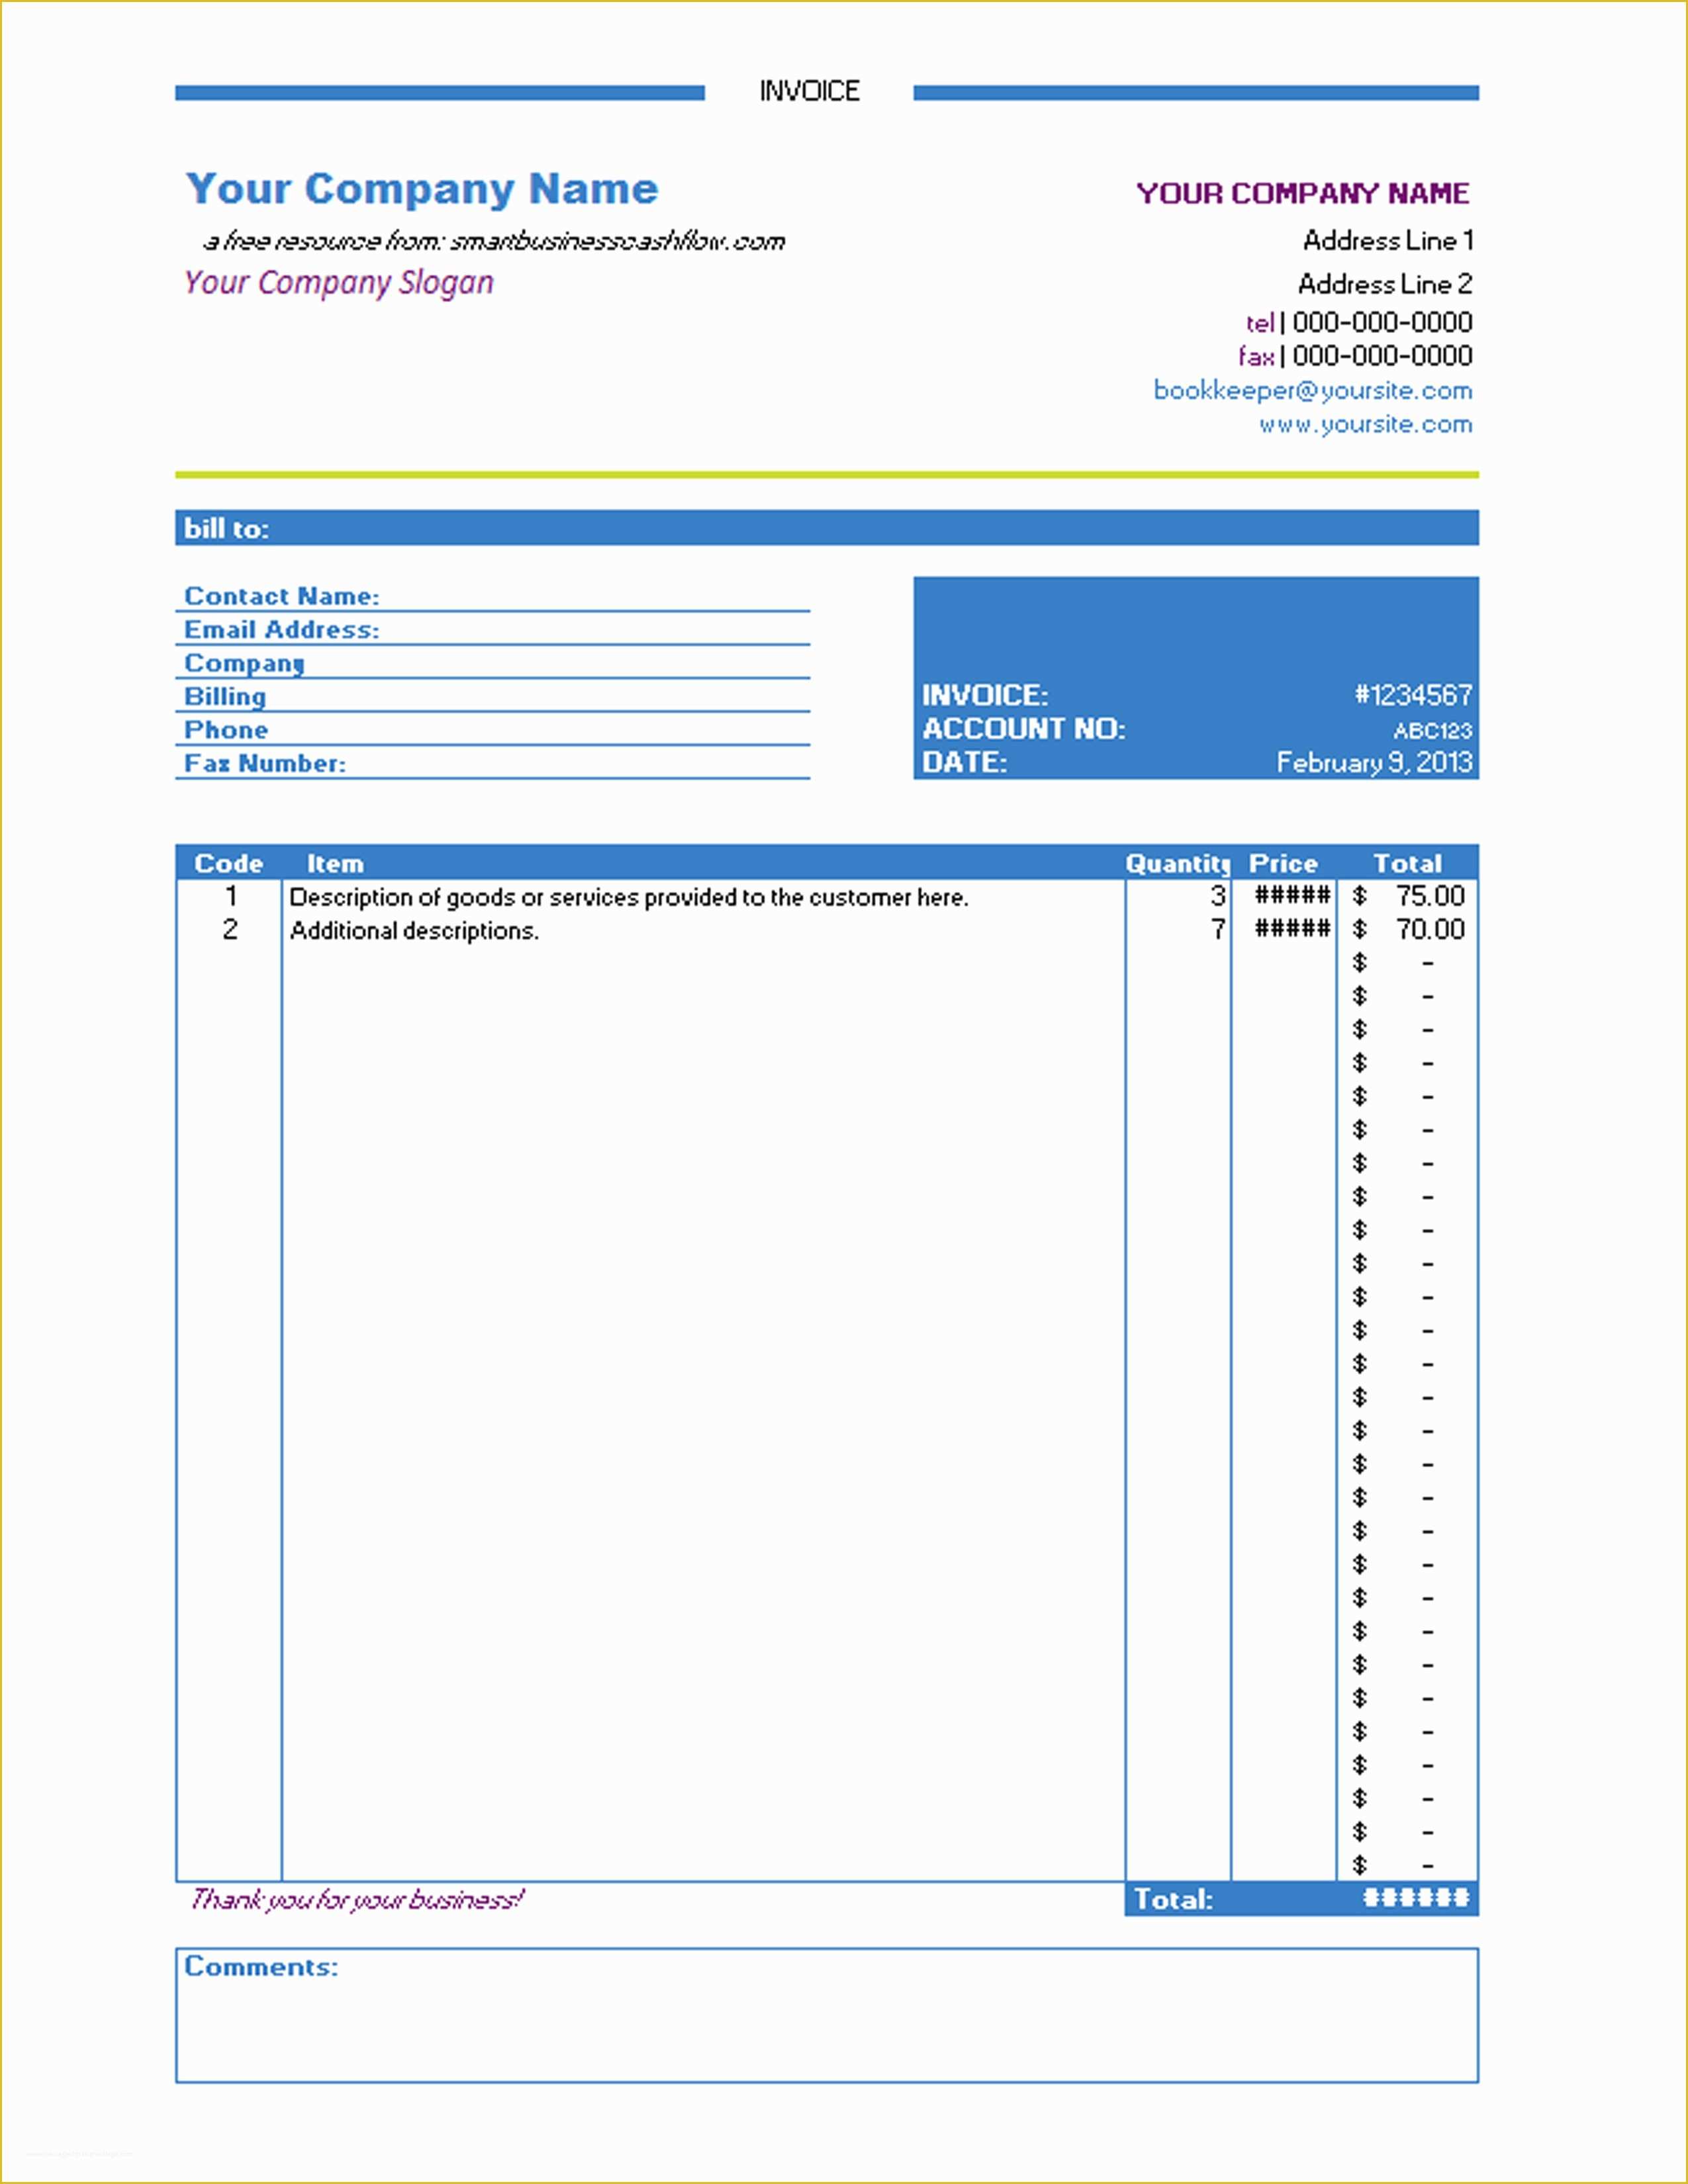 Free Invoice Template Excel Of Invoice Template Uk Excel Heritagechristiancollege